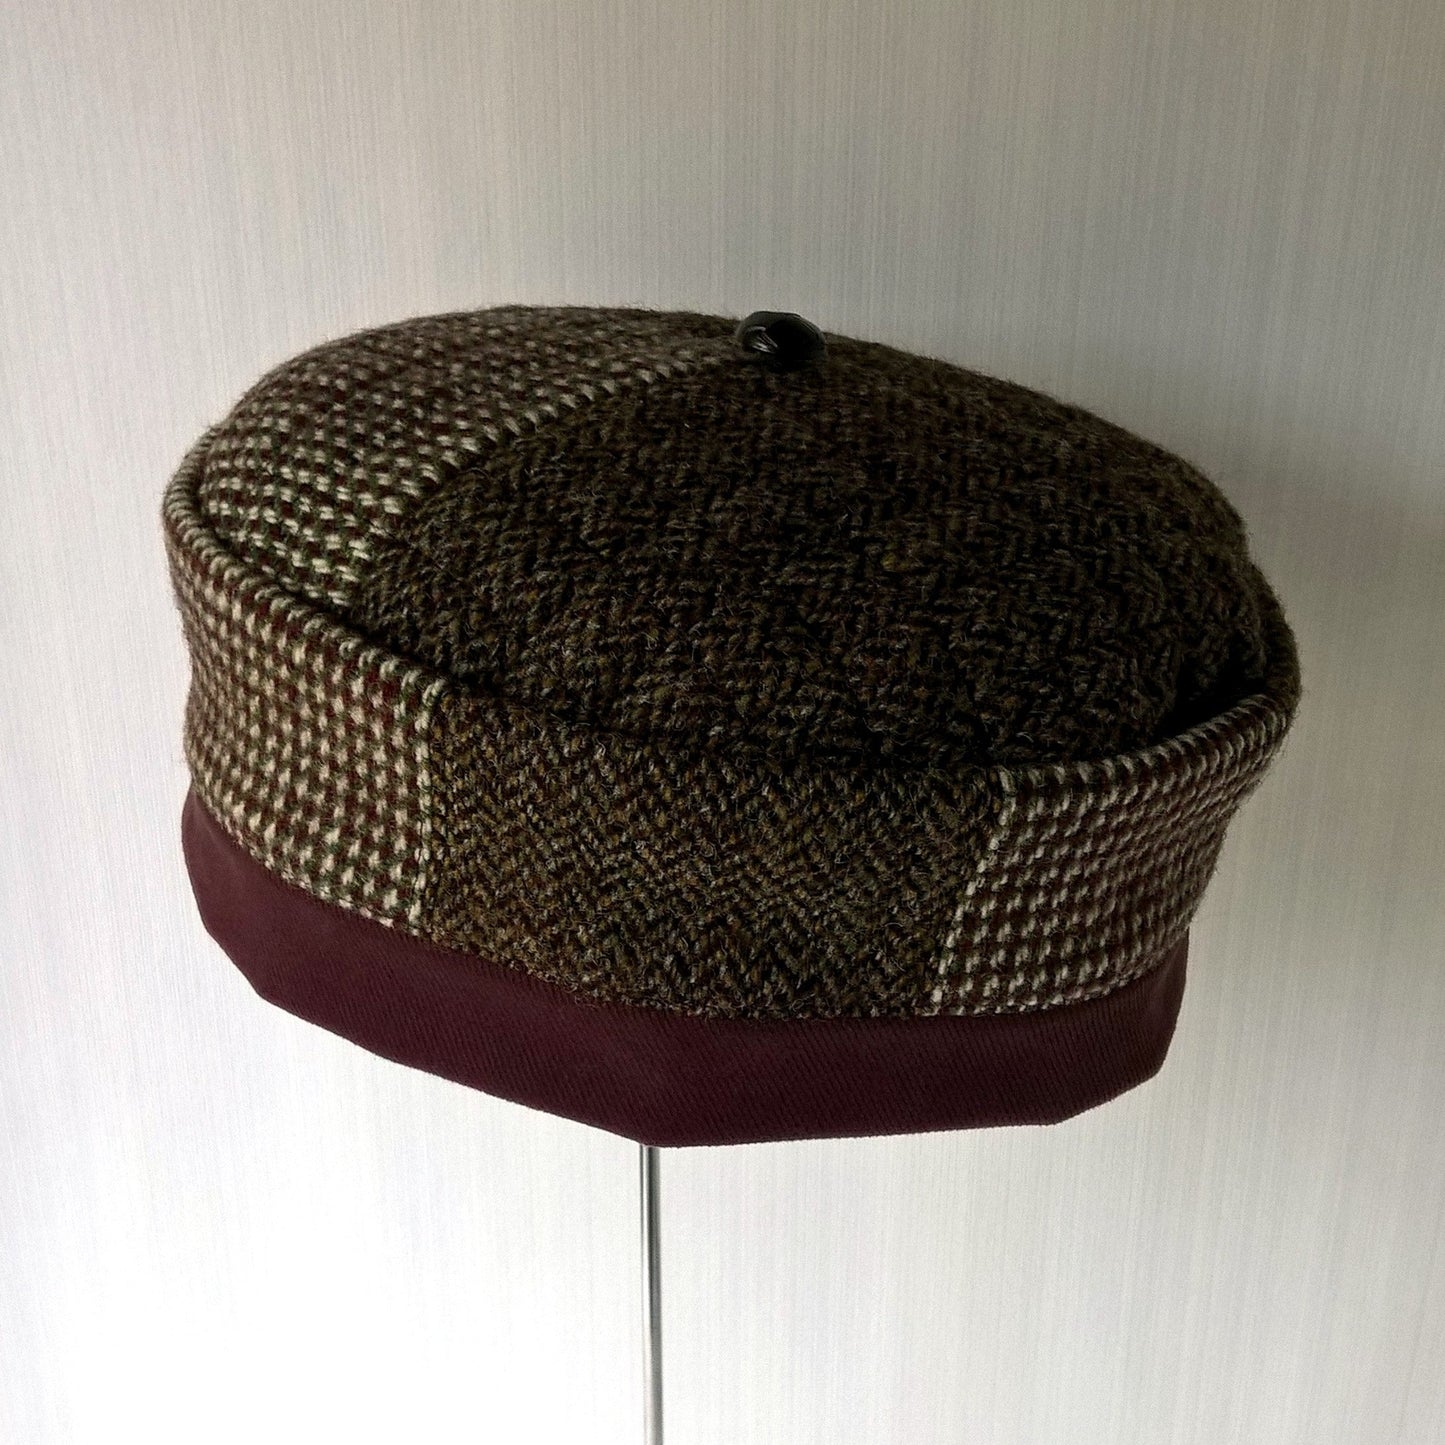 The Harris tweed wool hat can be worn without the tassel